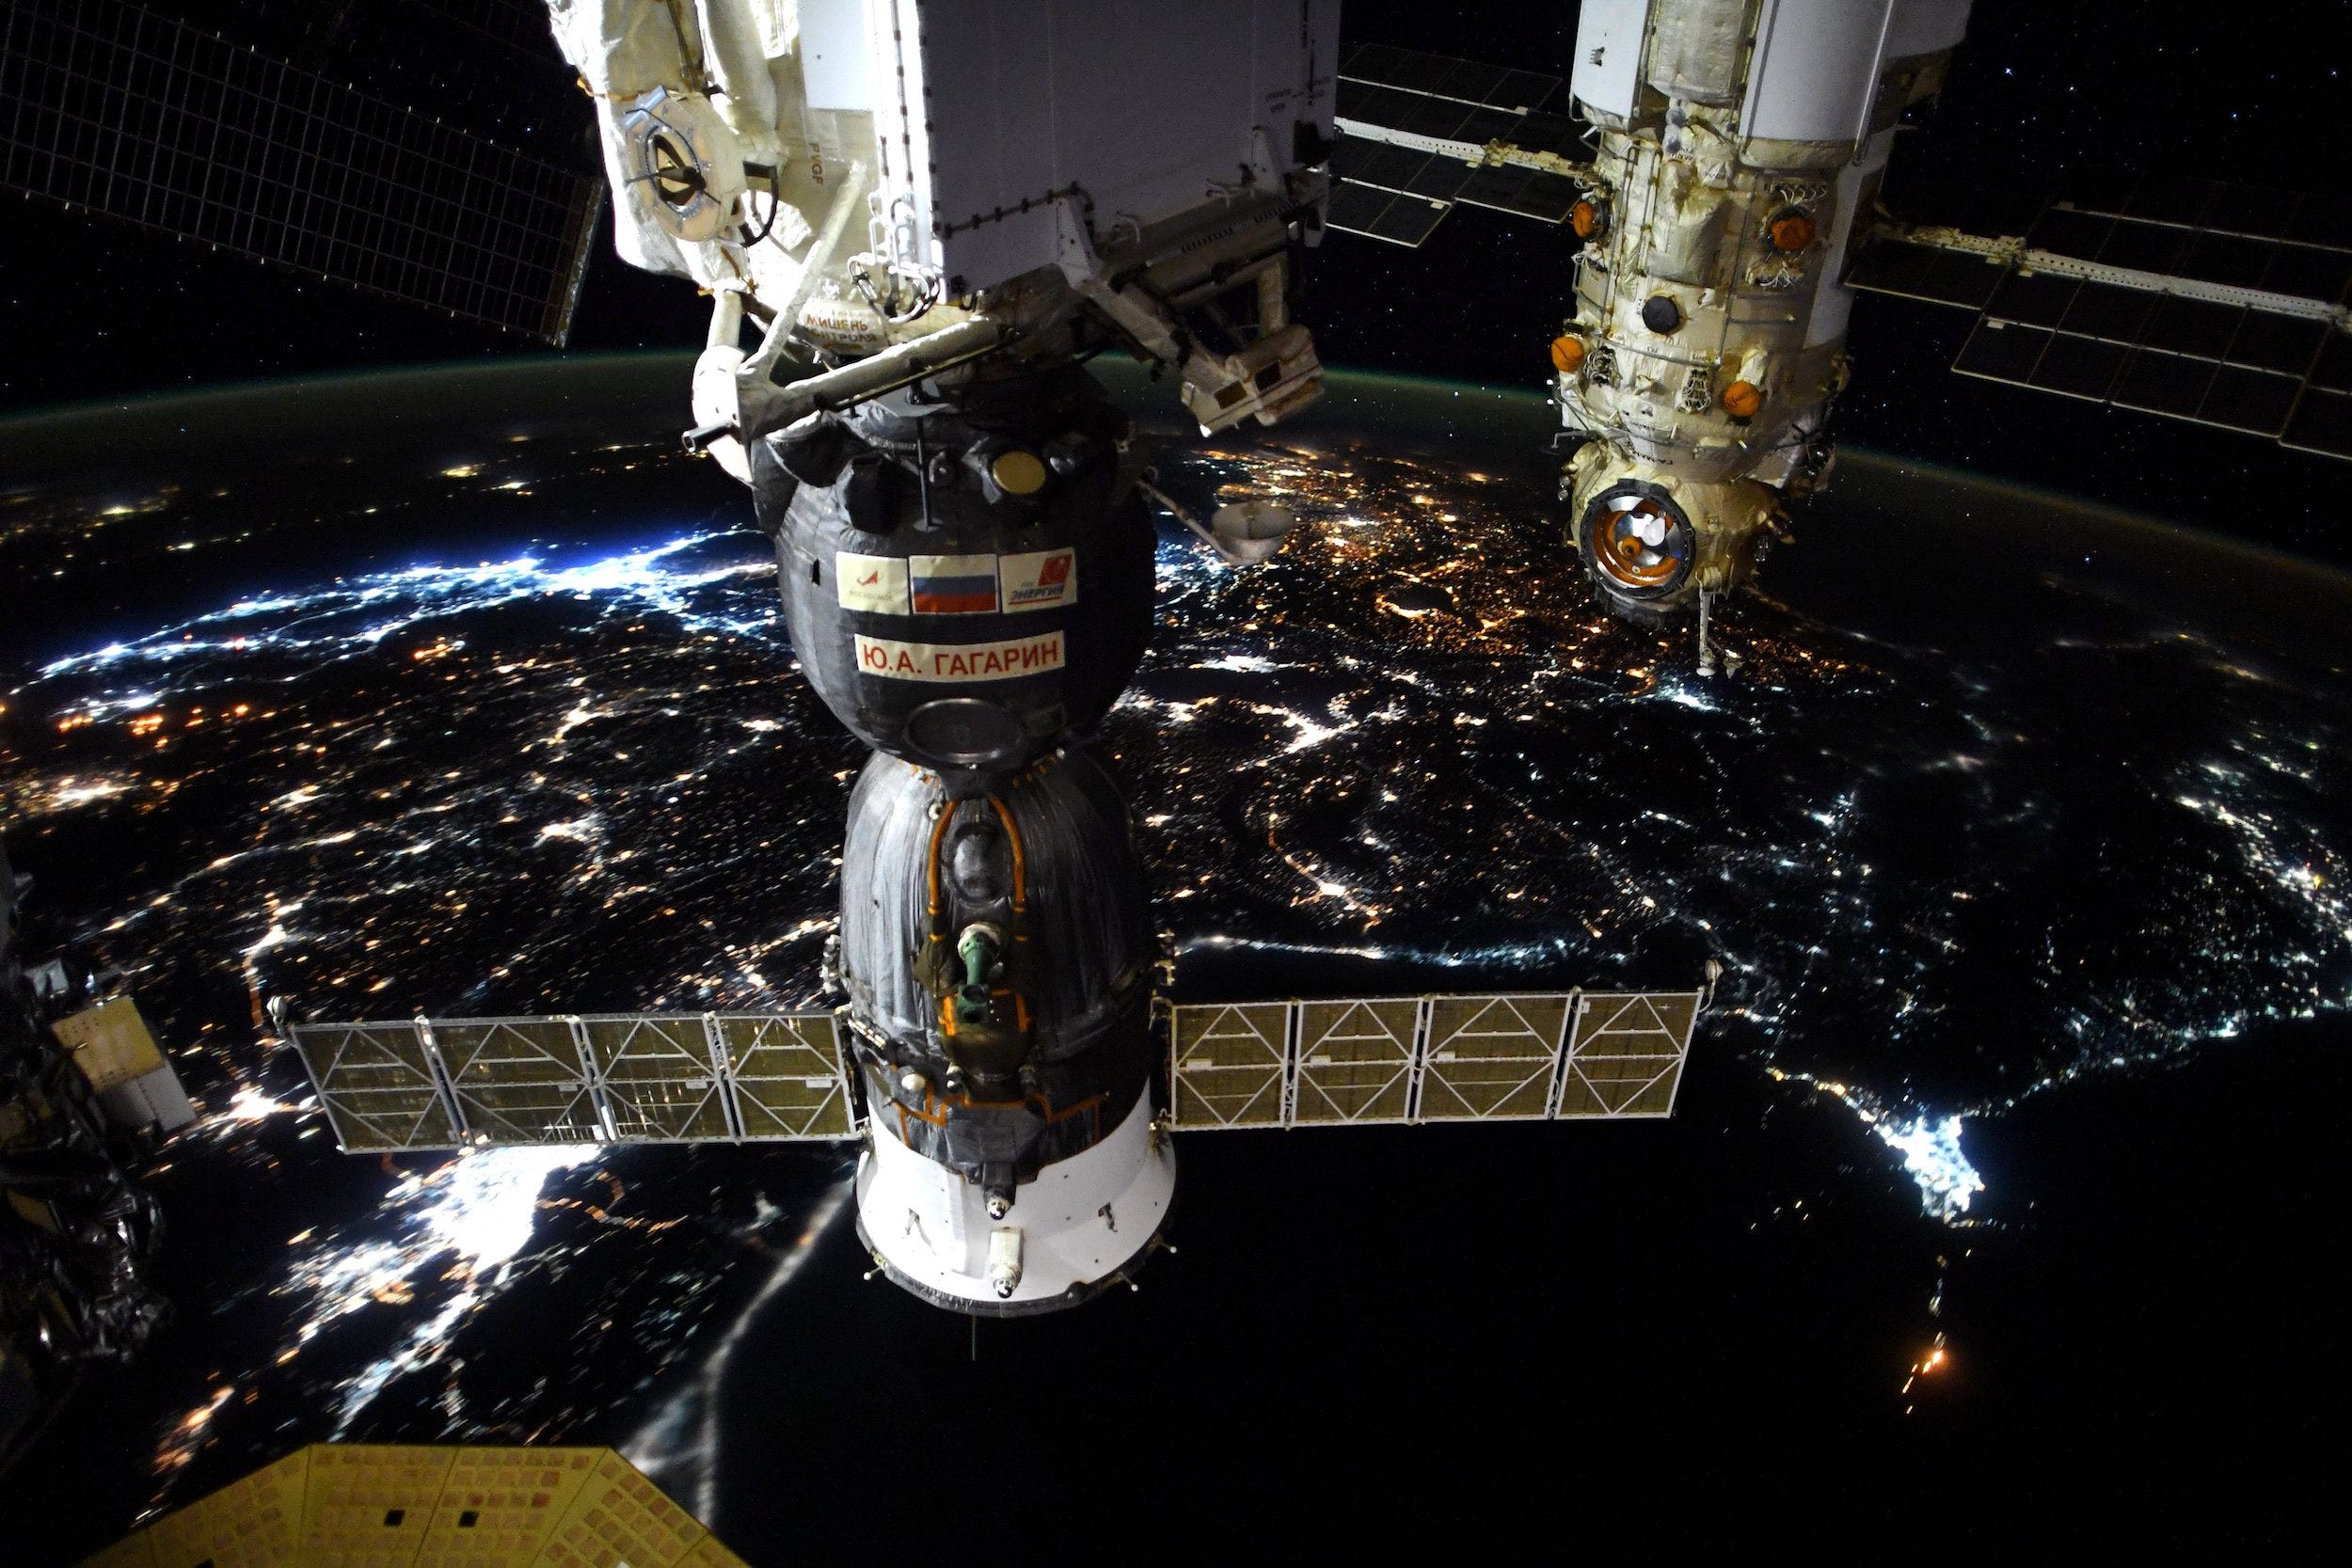 spaceships docked to the space station above nighttime earth